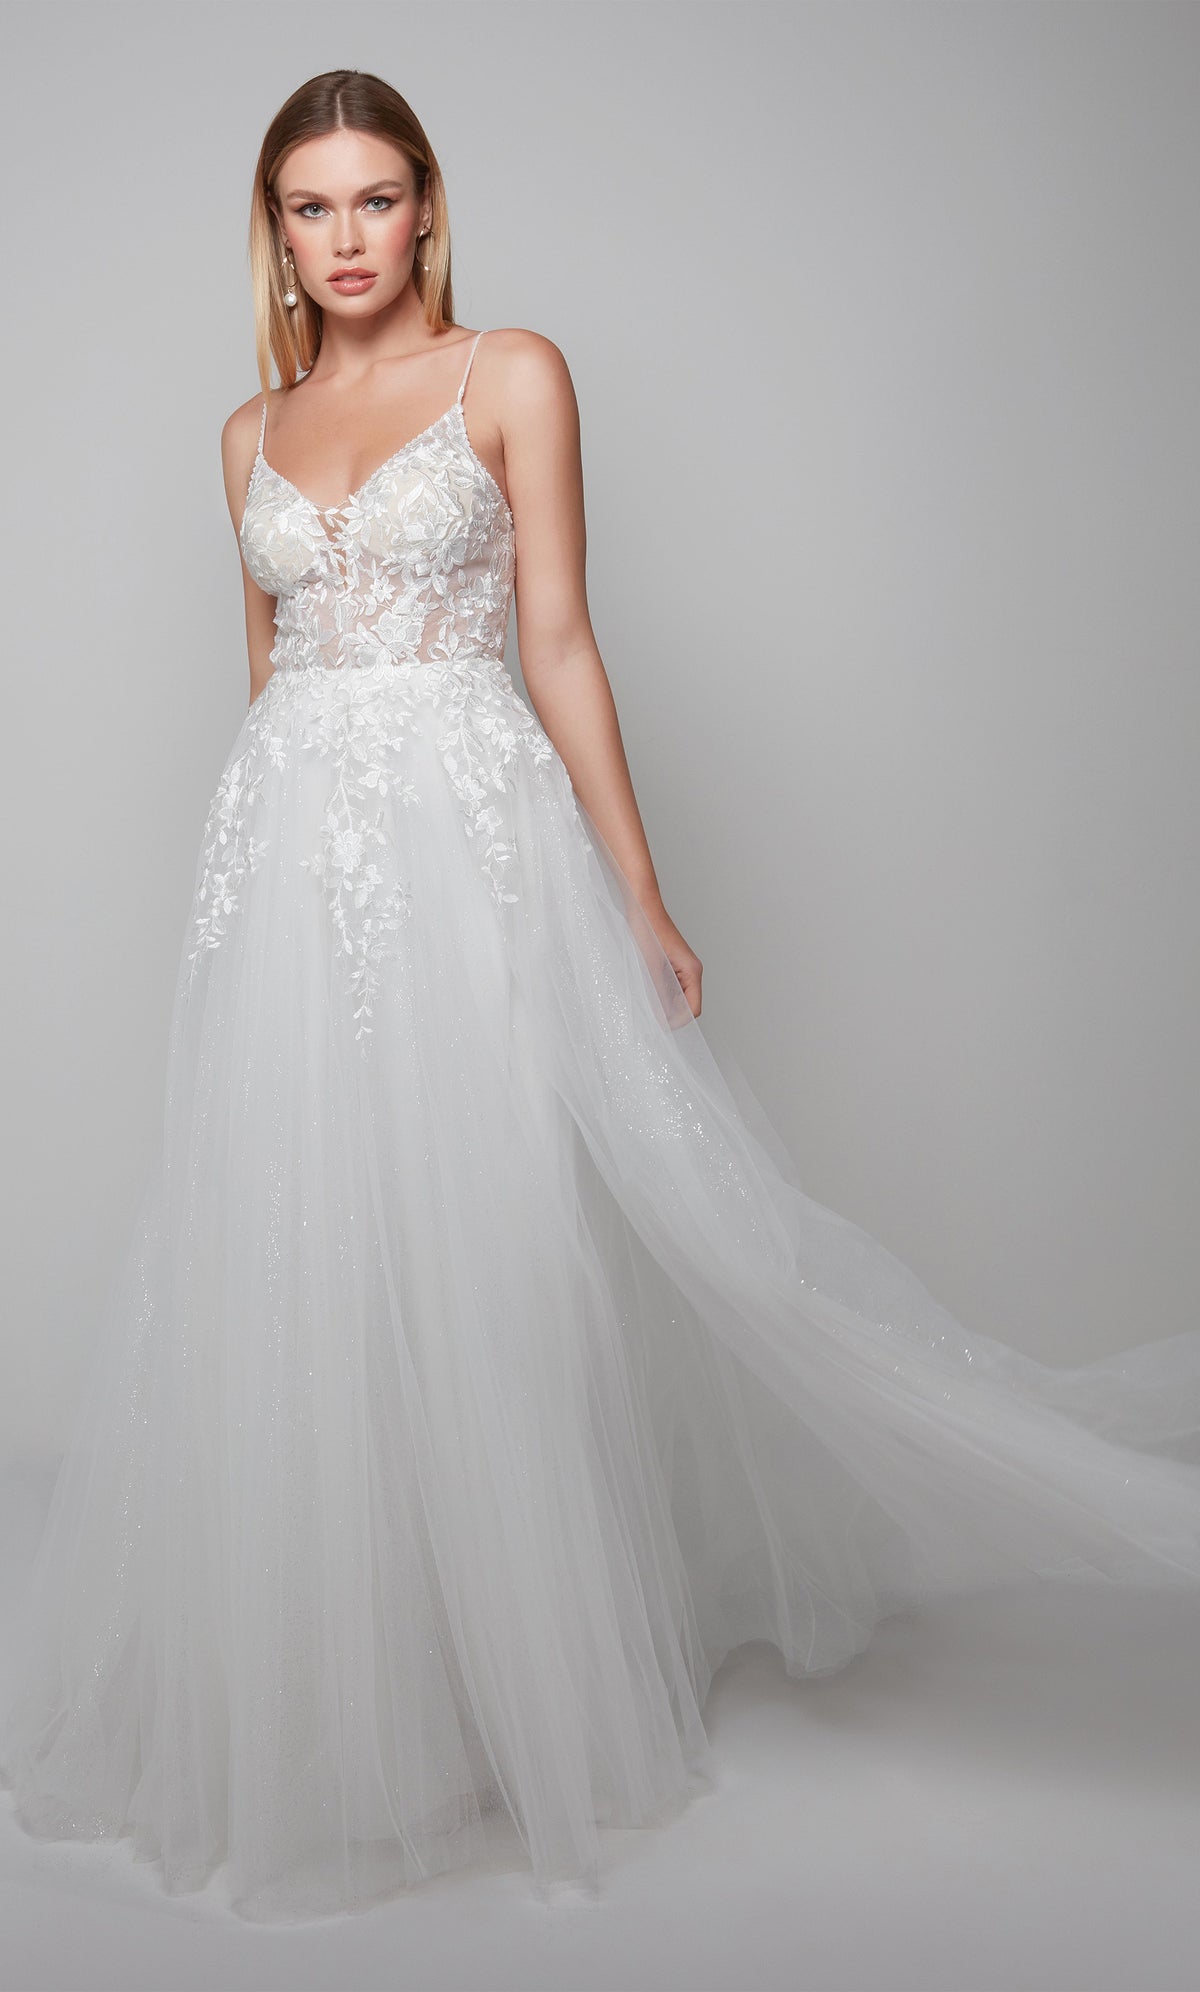 Sleeveless tulle wedding dress with a sheer lace bodice in ivory.